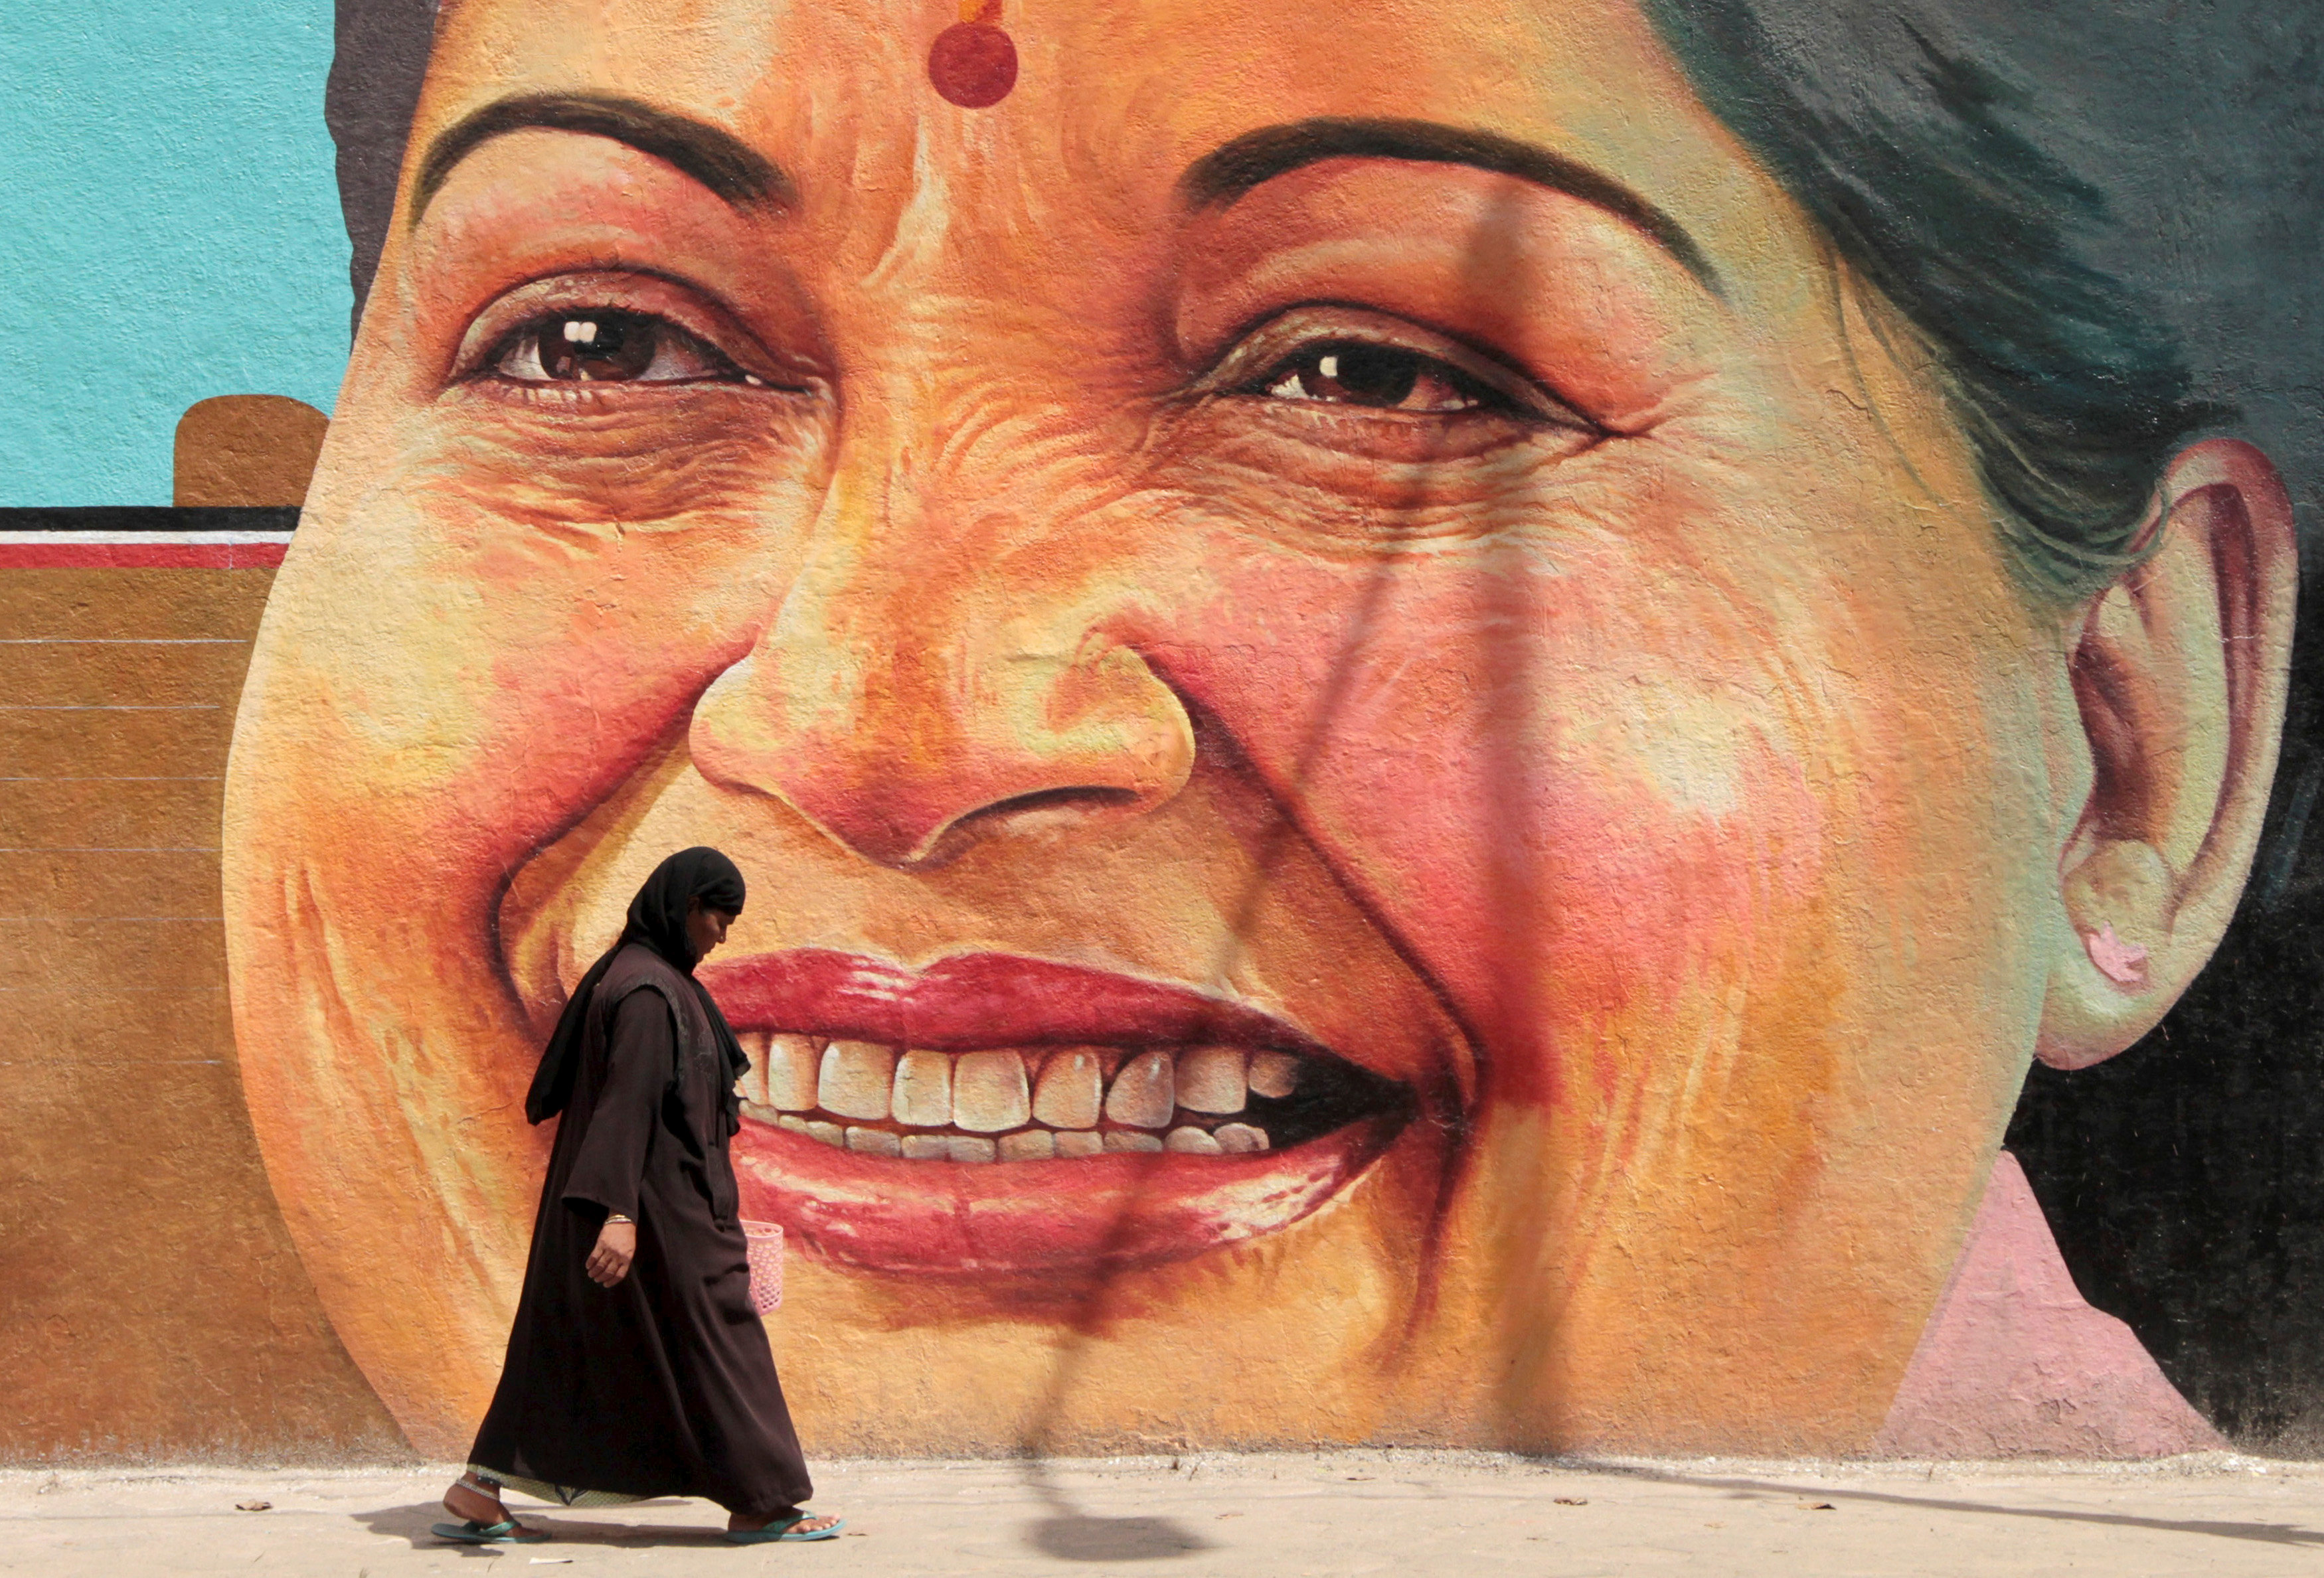 In Pictures: Jayalalithaa, 'Amma' to millions, dies at 68